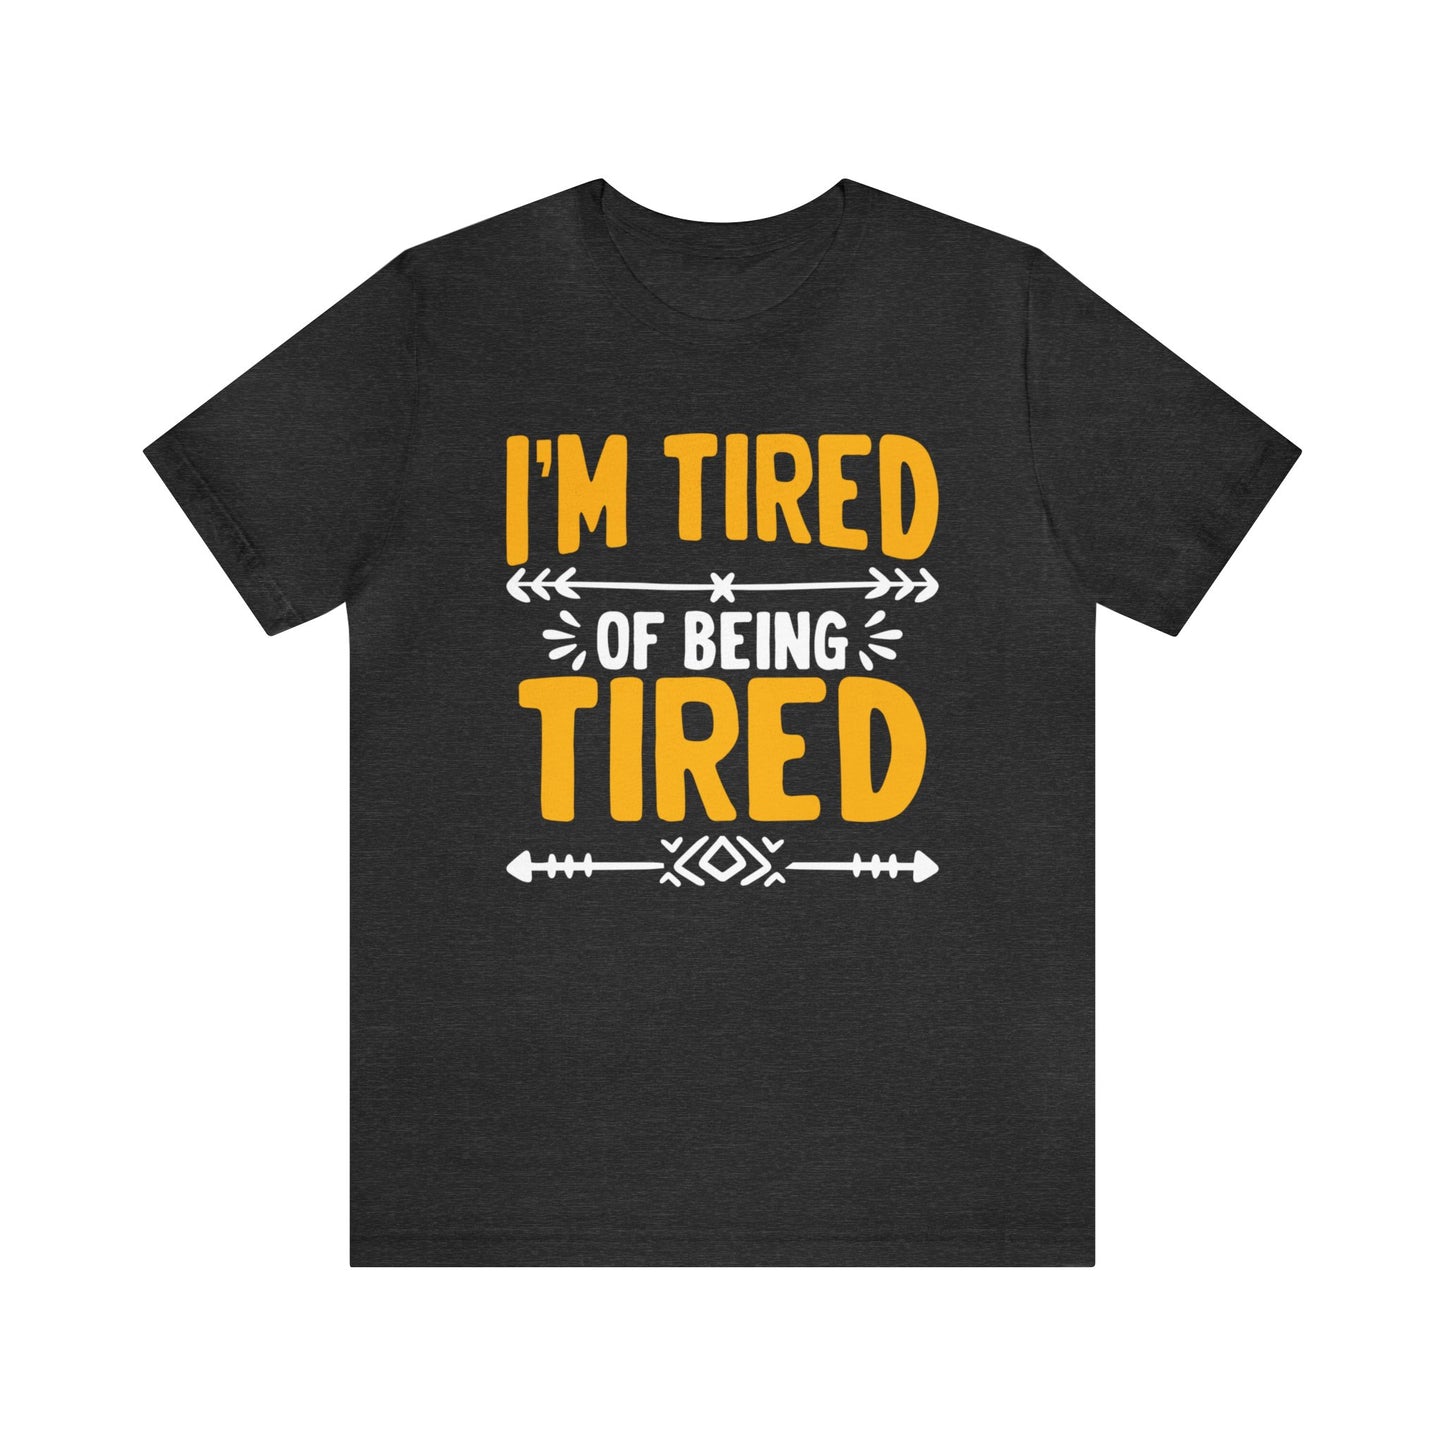 I’m Tired of Being Tired Unisex T-Shirt